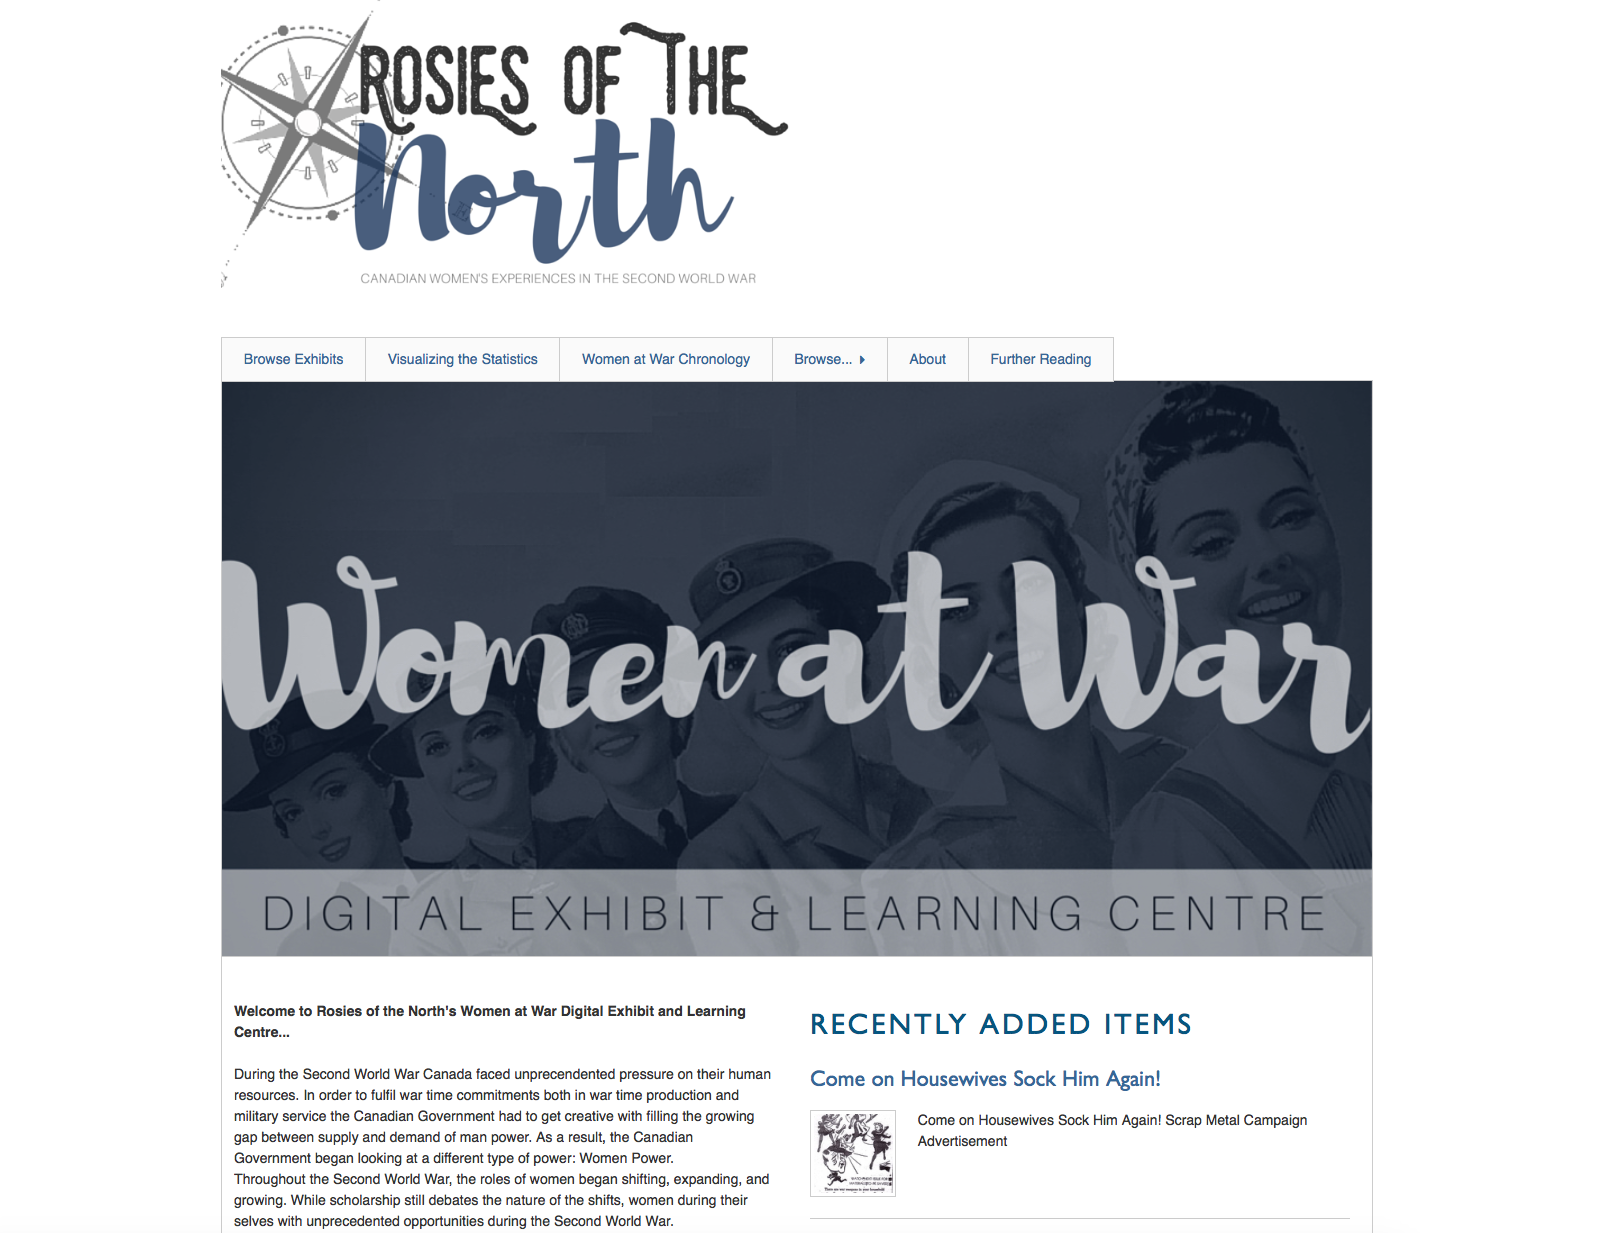 Rosies of the North: Canadian Women's Experience in the Second Worl War